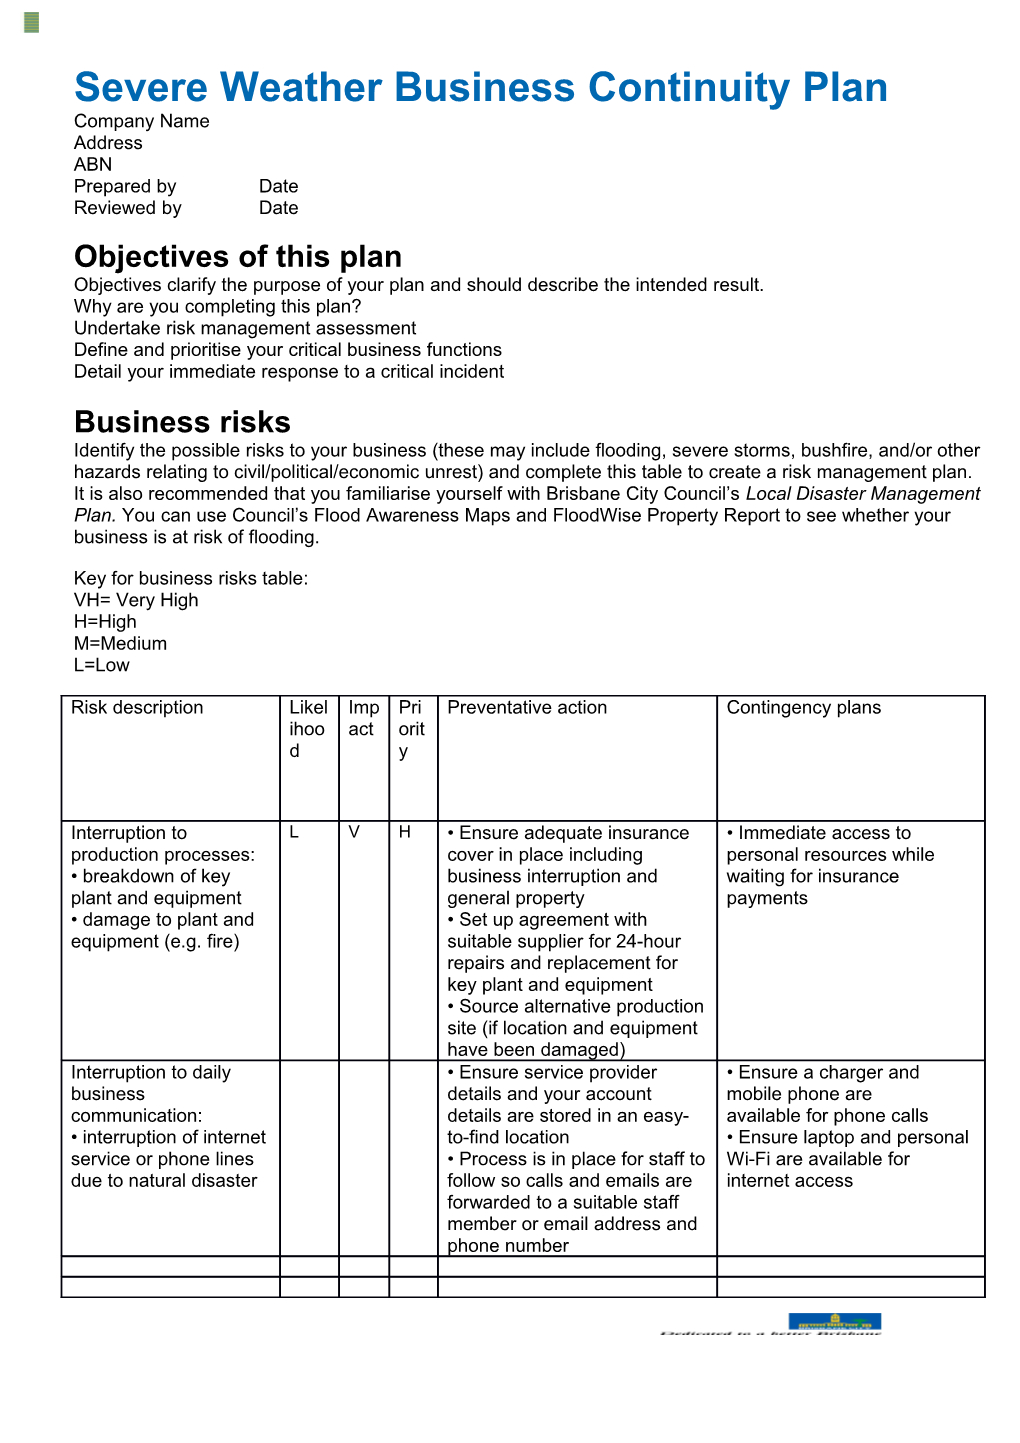 Severe Weather Business Continuity Plan